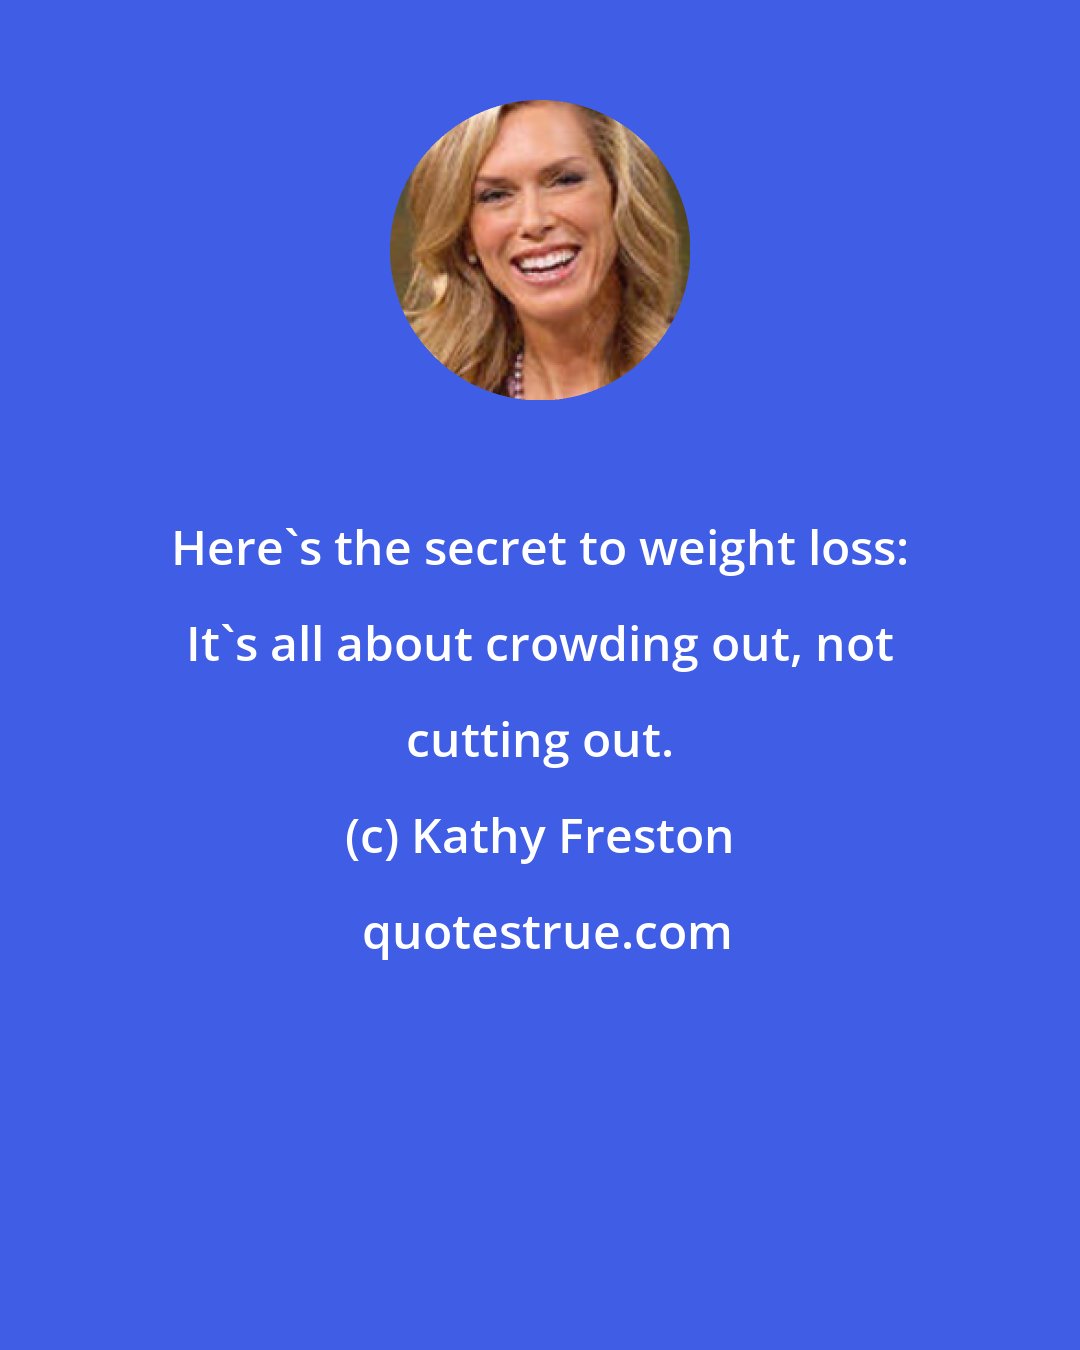 Kathy Freston: Here's the secret to weight loss: It's all about crowding out, not cutting out.